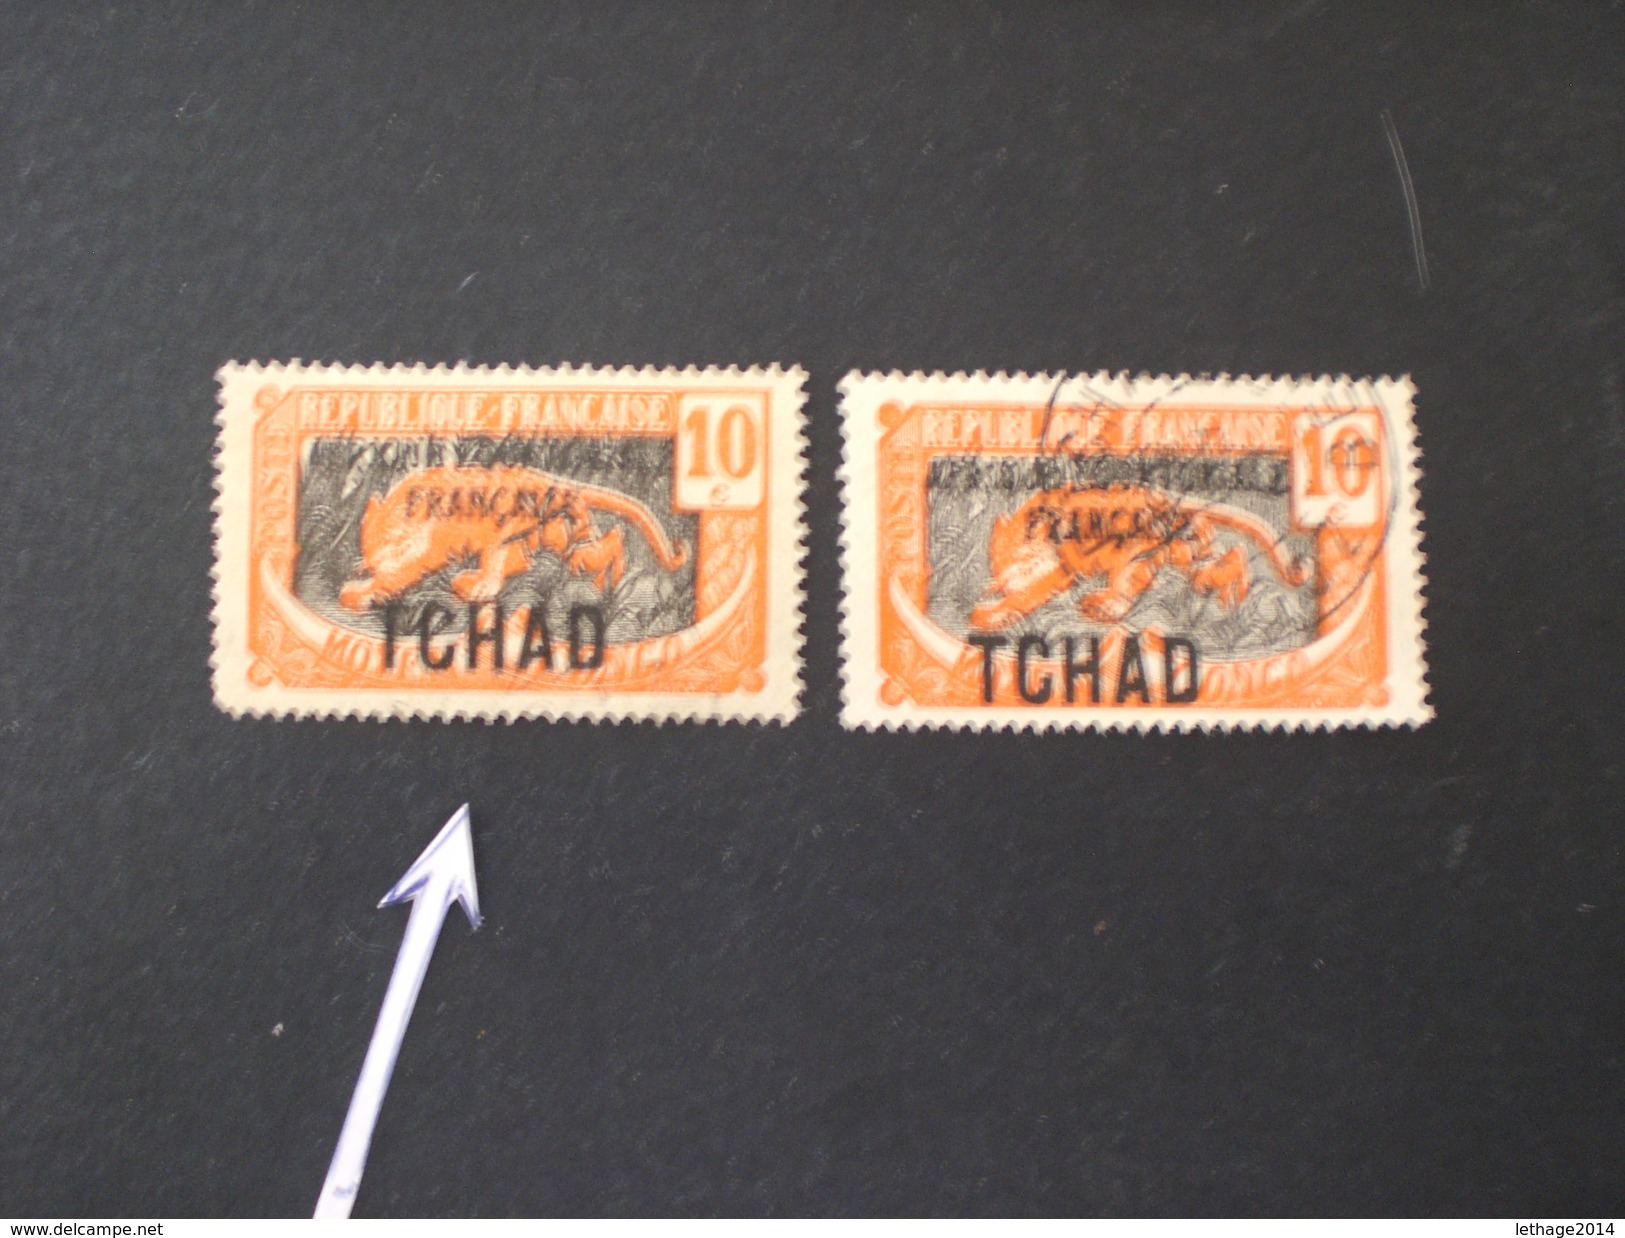 TCHAD CHAD 1925 Panthere Overprinted "AFRIQUE EQUATORIALE FRANCAISE" Color Error Is Not Gray But Black - Gebraucht